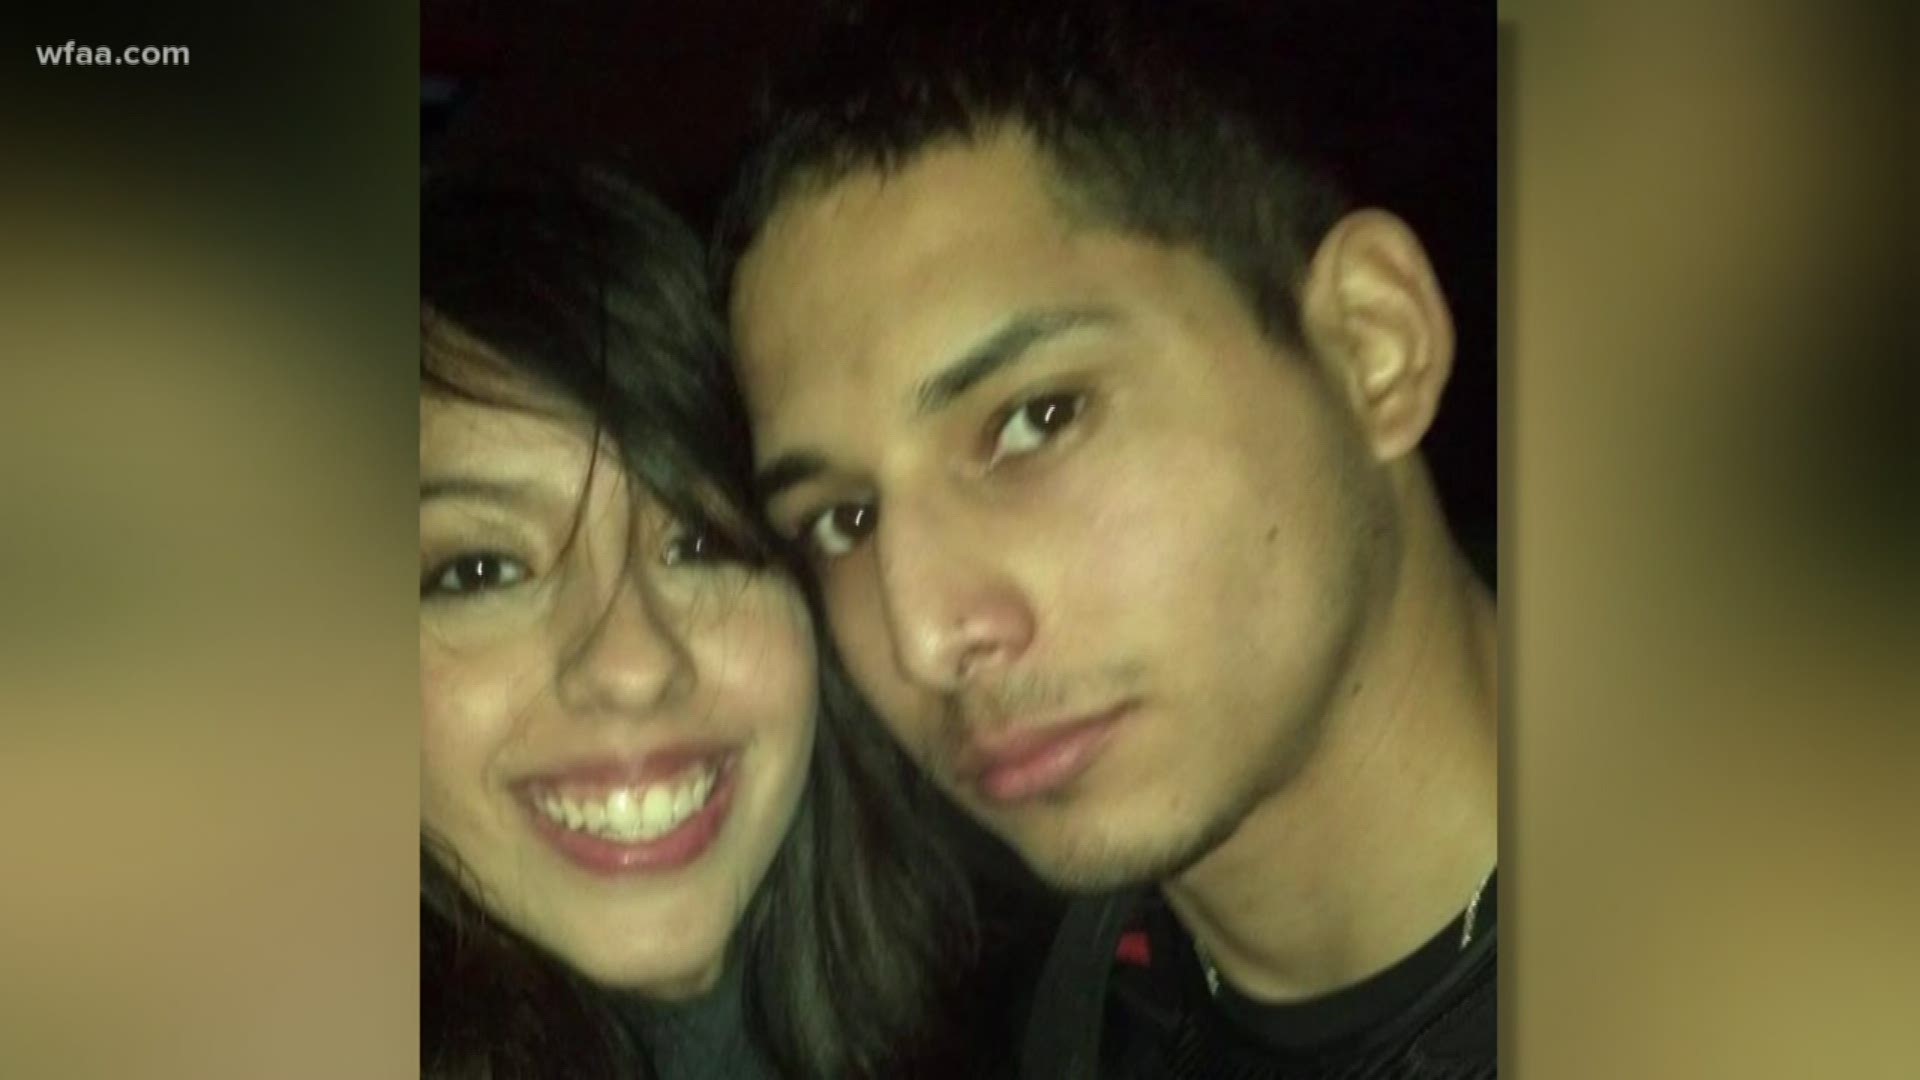 Search for missing Grand Prairie couple